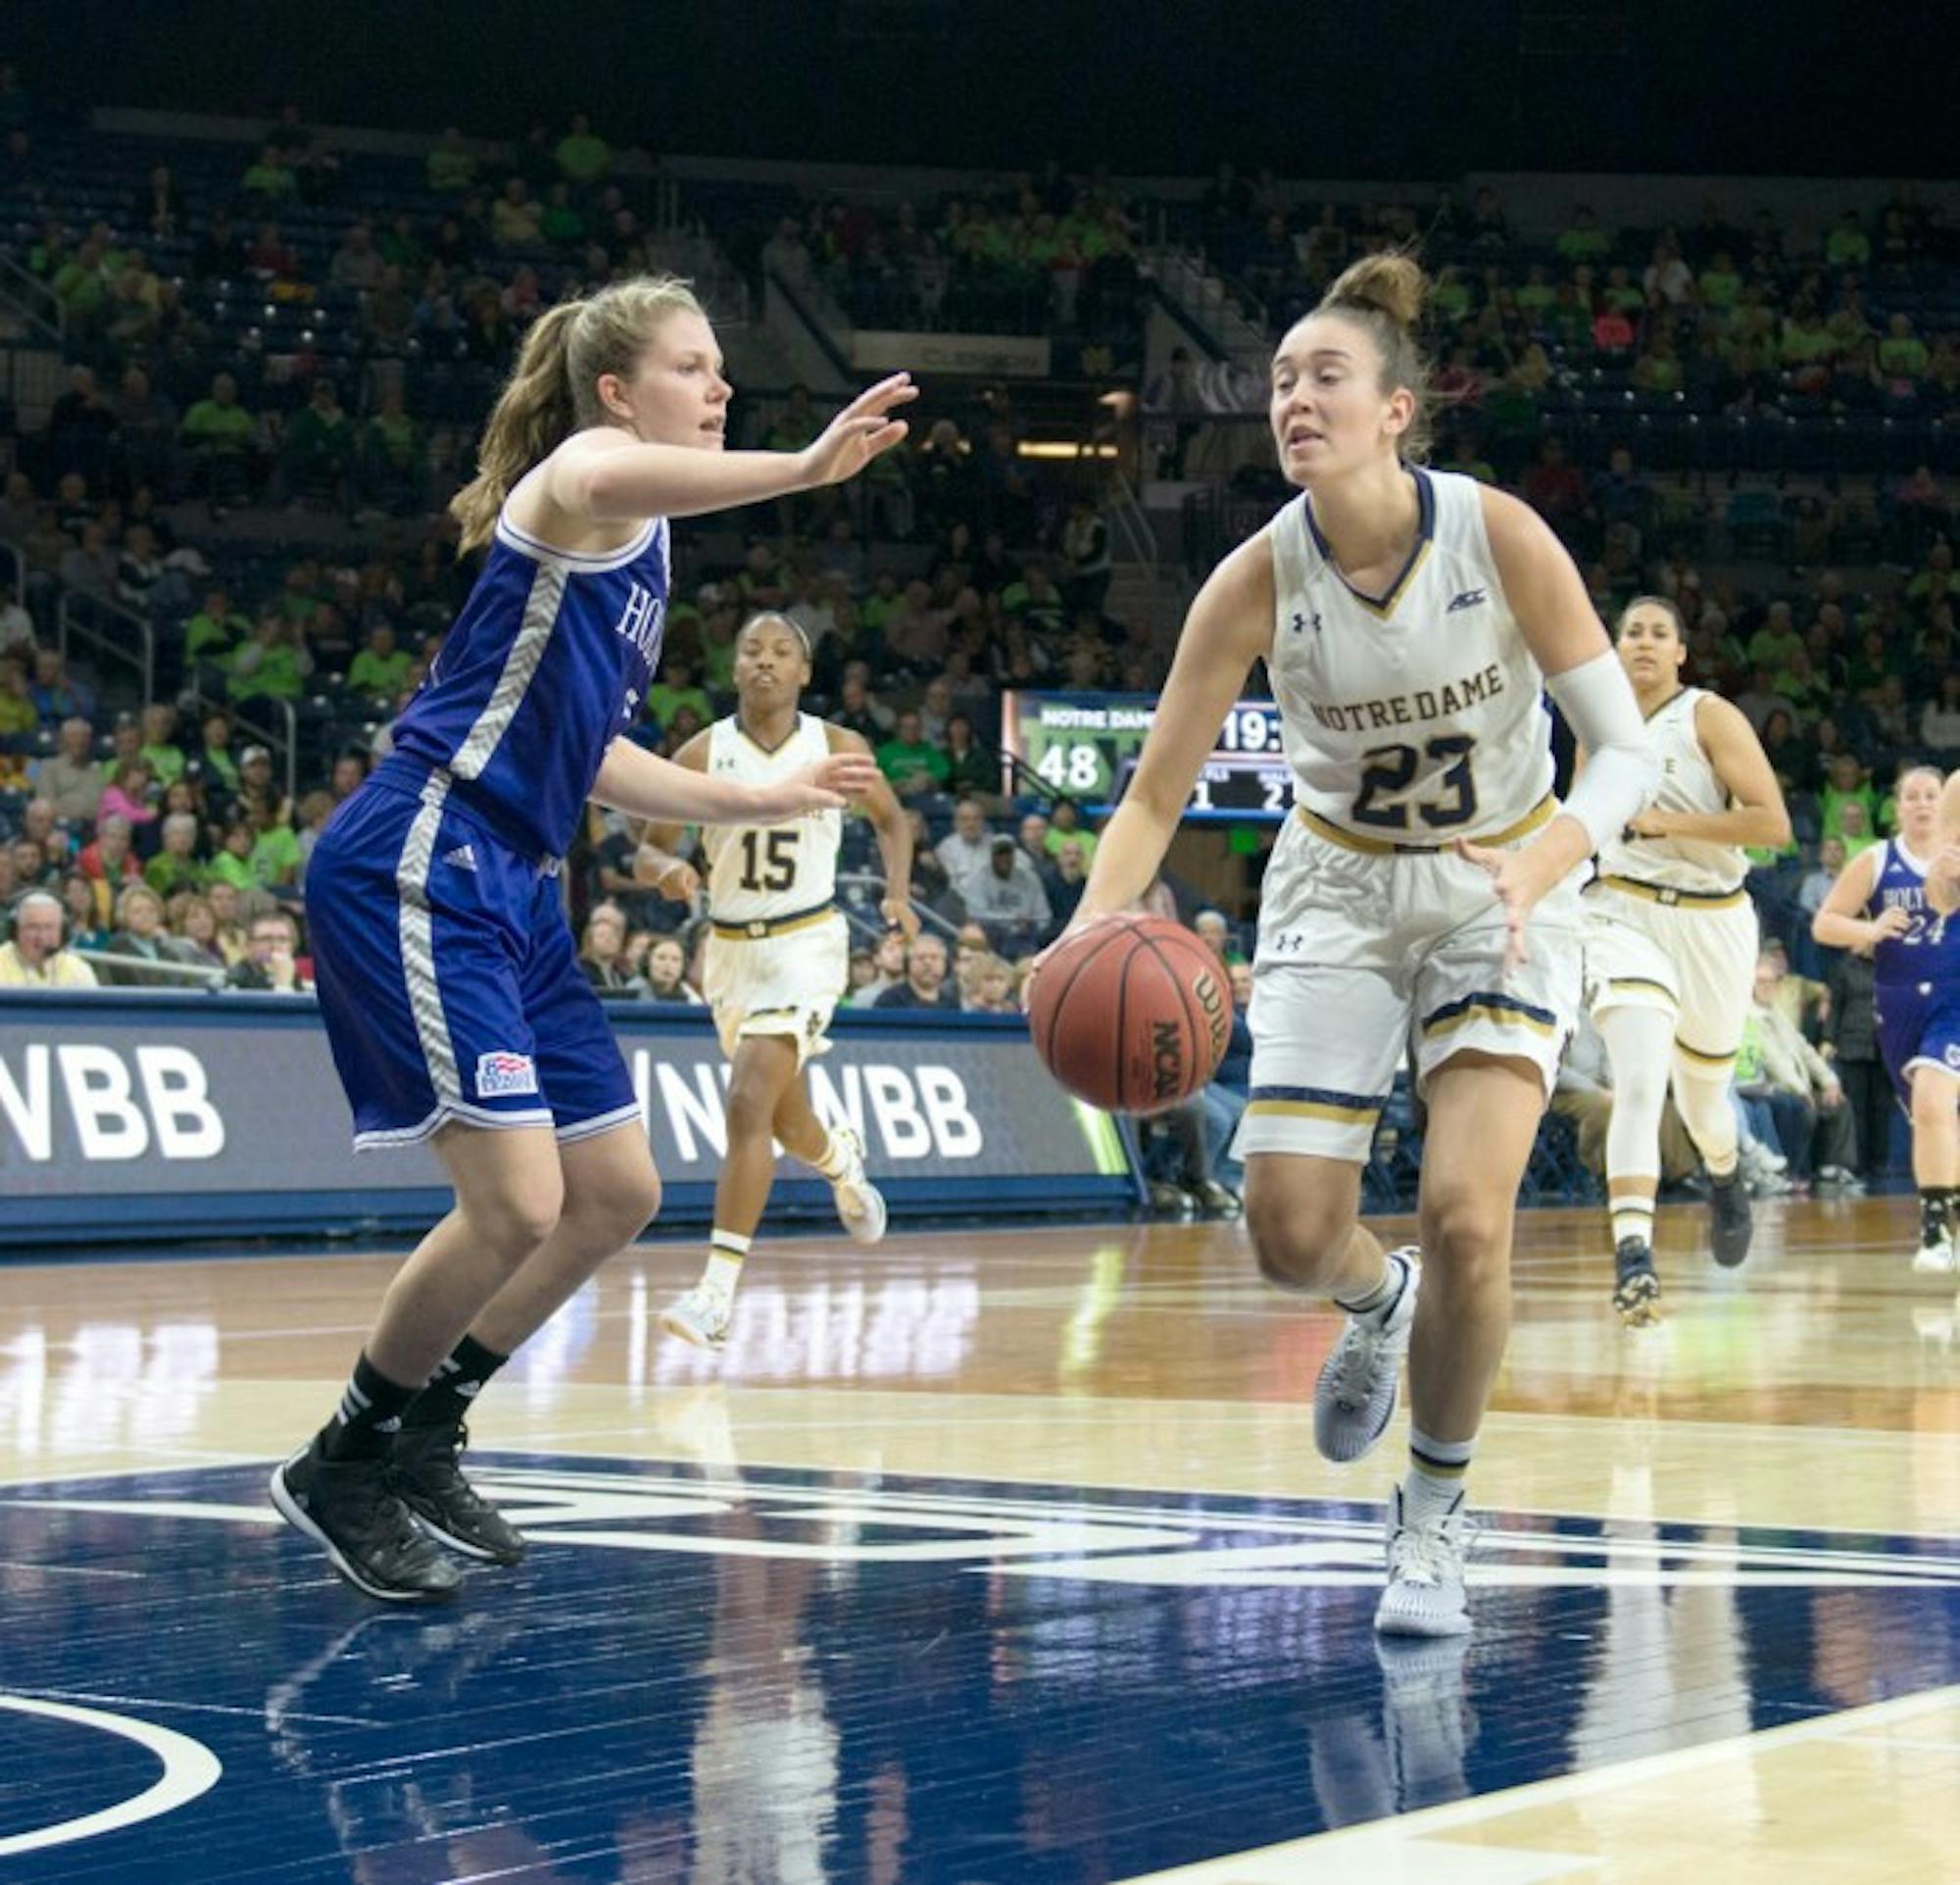 Irish junior guard Michaela Mabrey drives to the basket during Notre Dame’s 104-29 victory over Holy Cross on Nov. 23 at Purcell Pavilion. Mabrey scored 17 points in Notre Dame’s win over Kansas on Sunday.